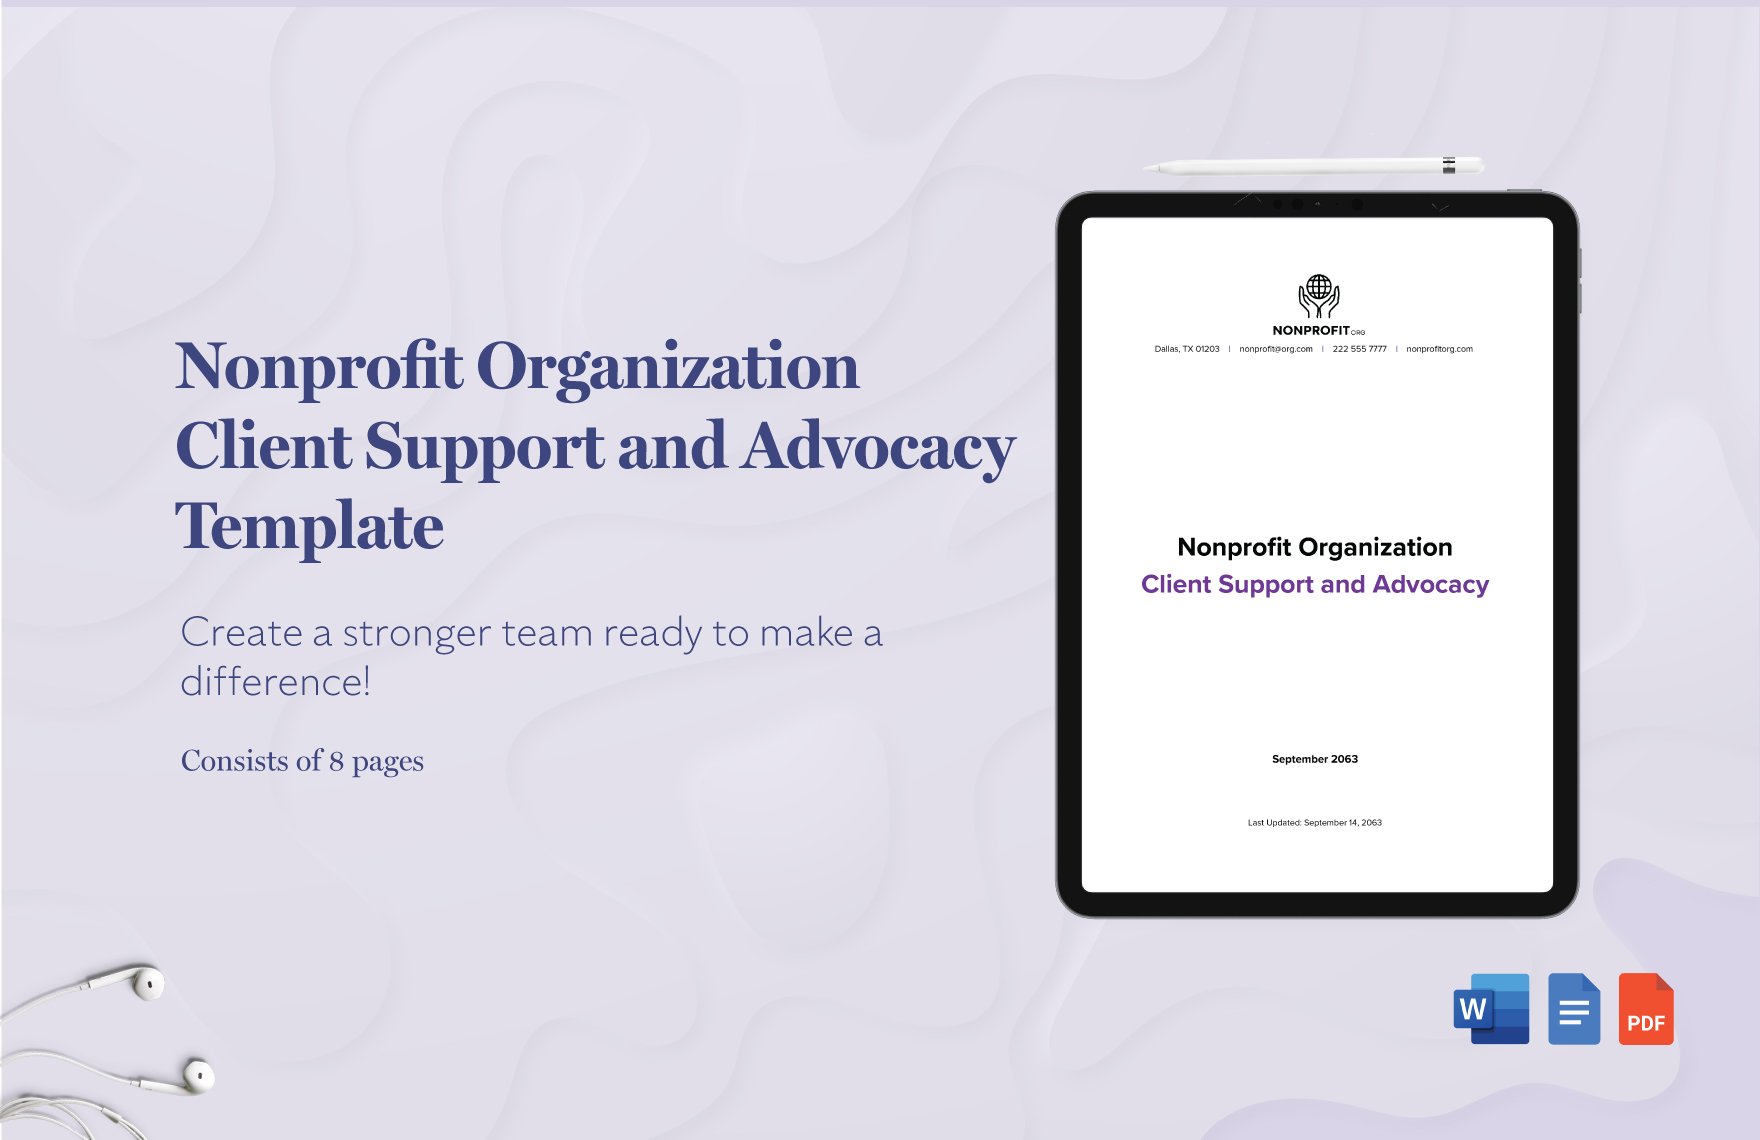 Nonprofit Organization Client Support and Advocacy Template